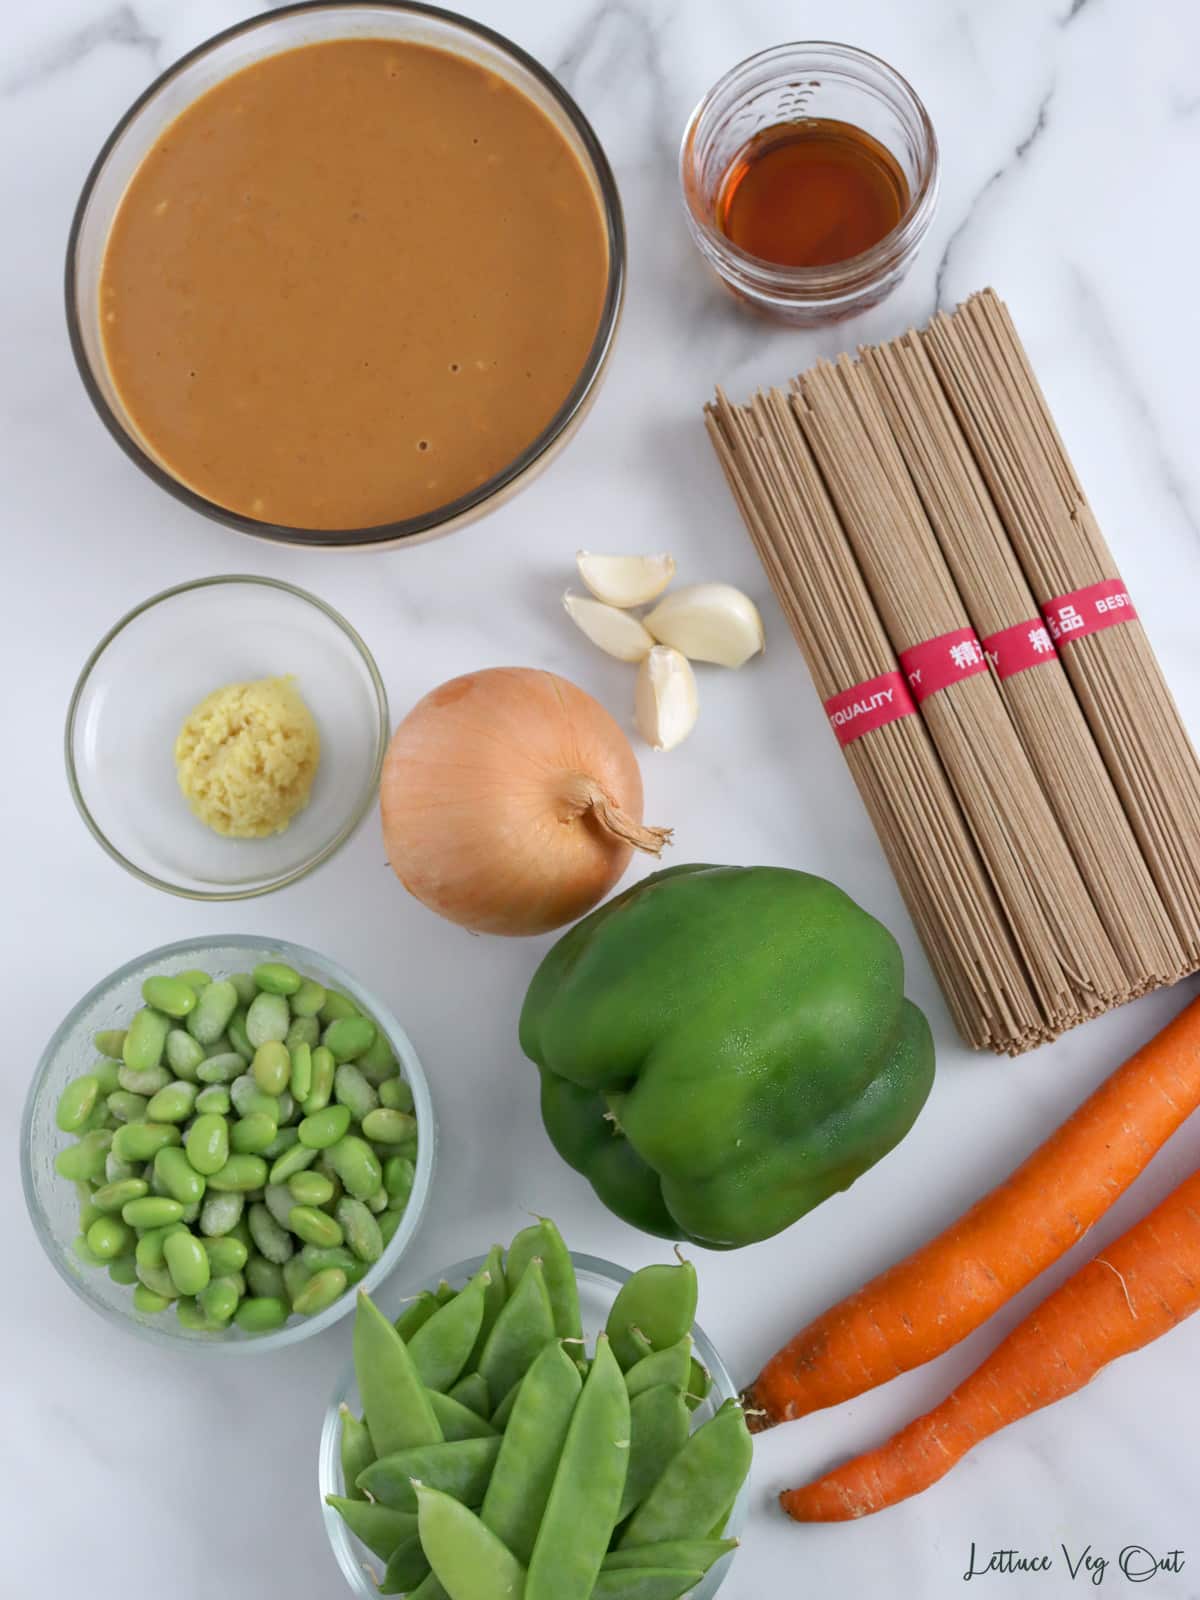 Ingredients for soba noodle stir fry with peanut sauce.